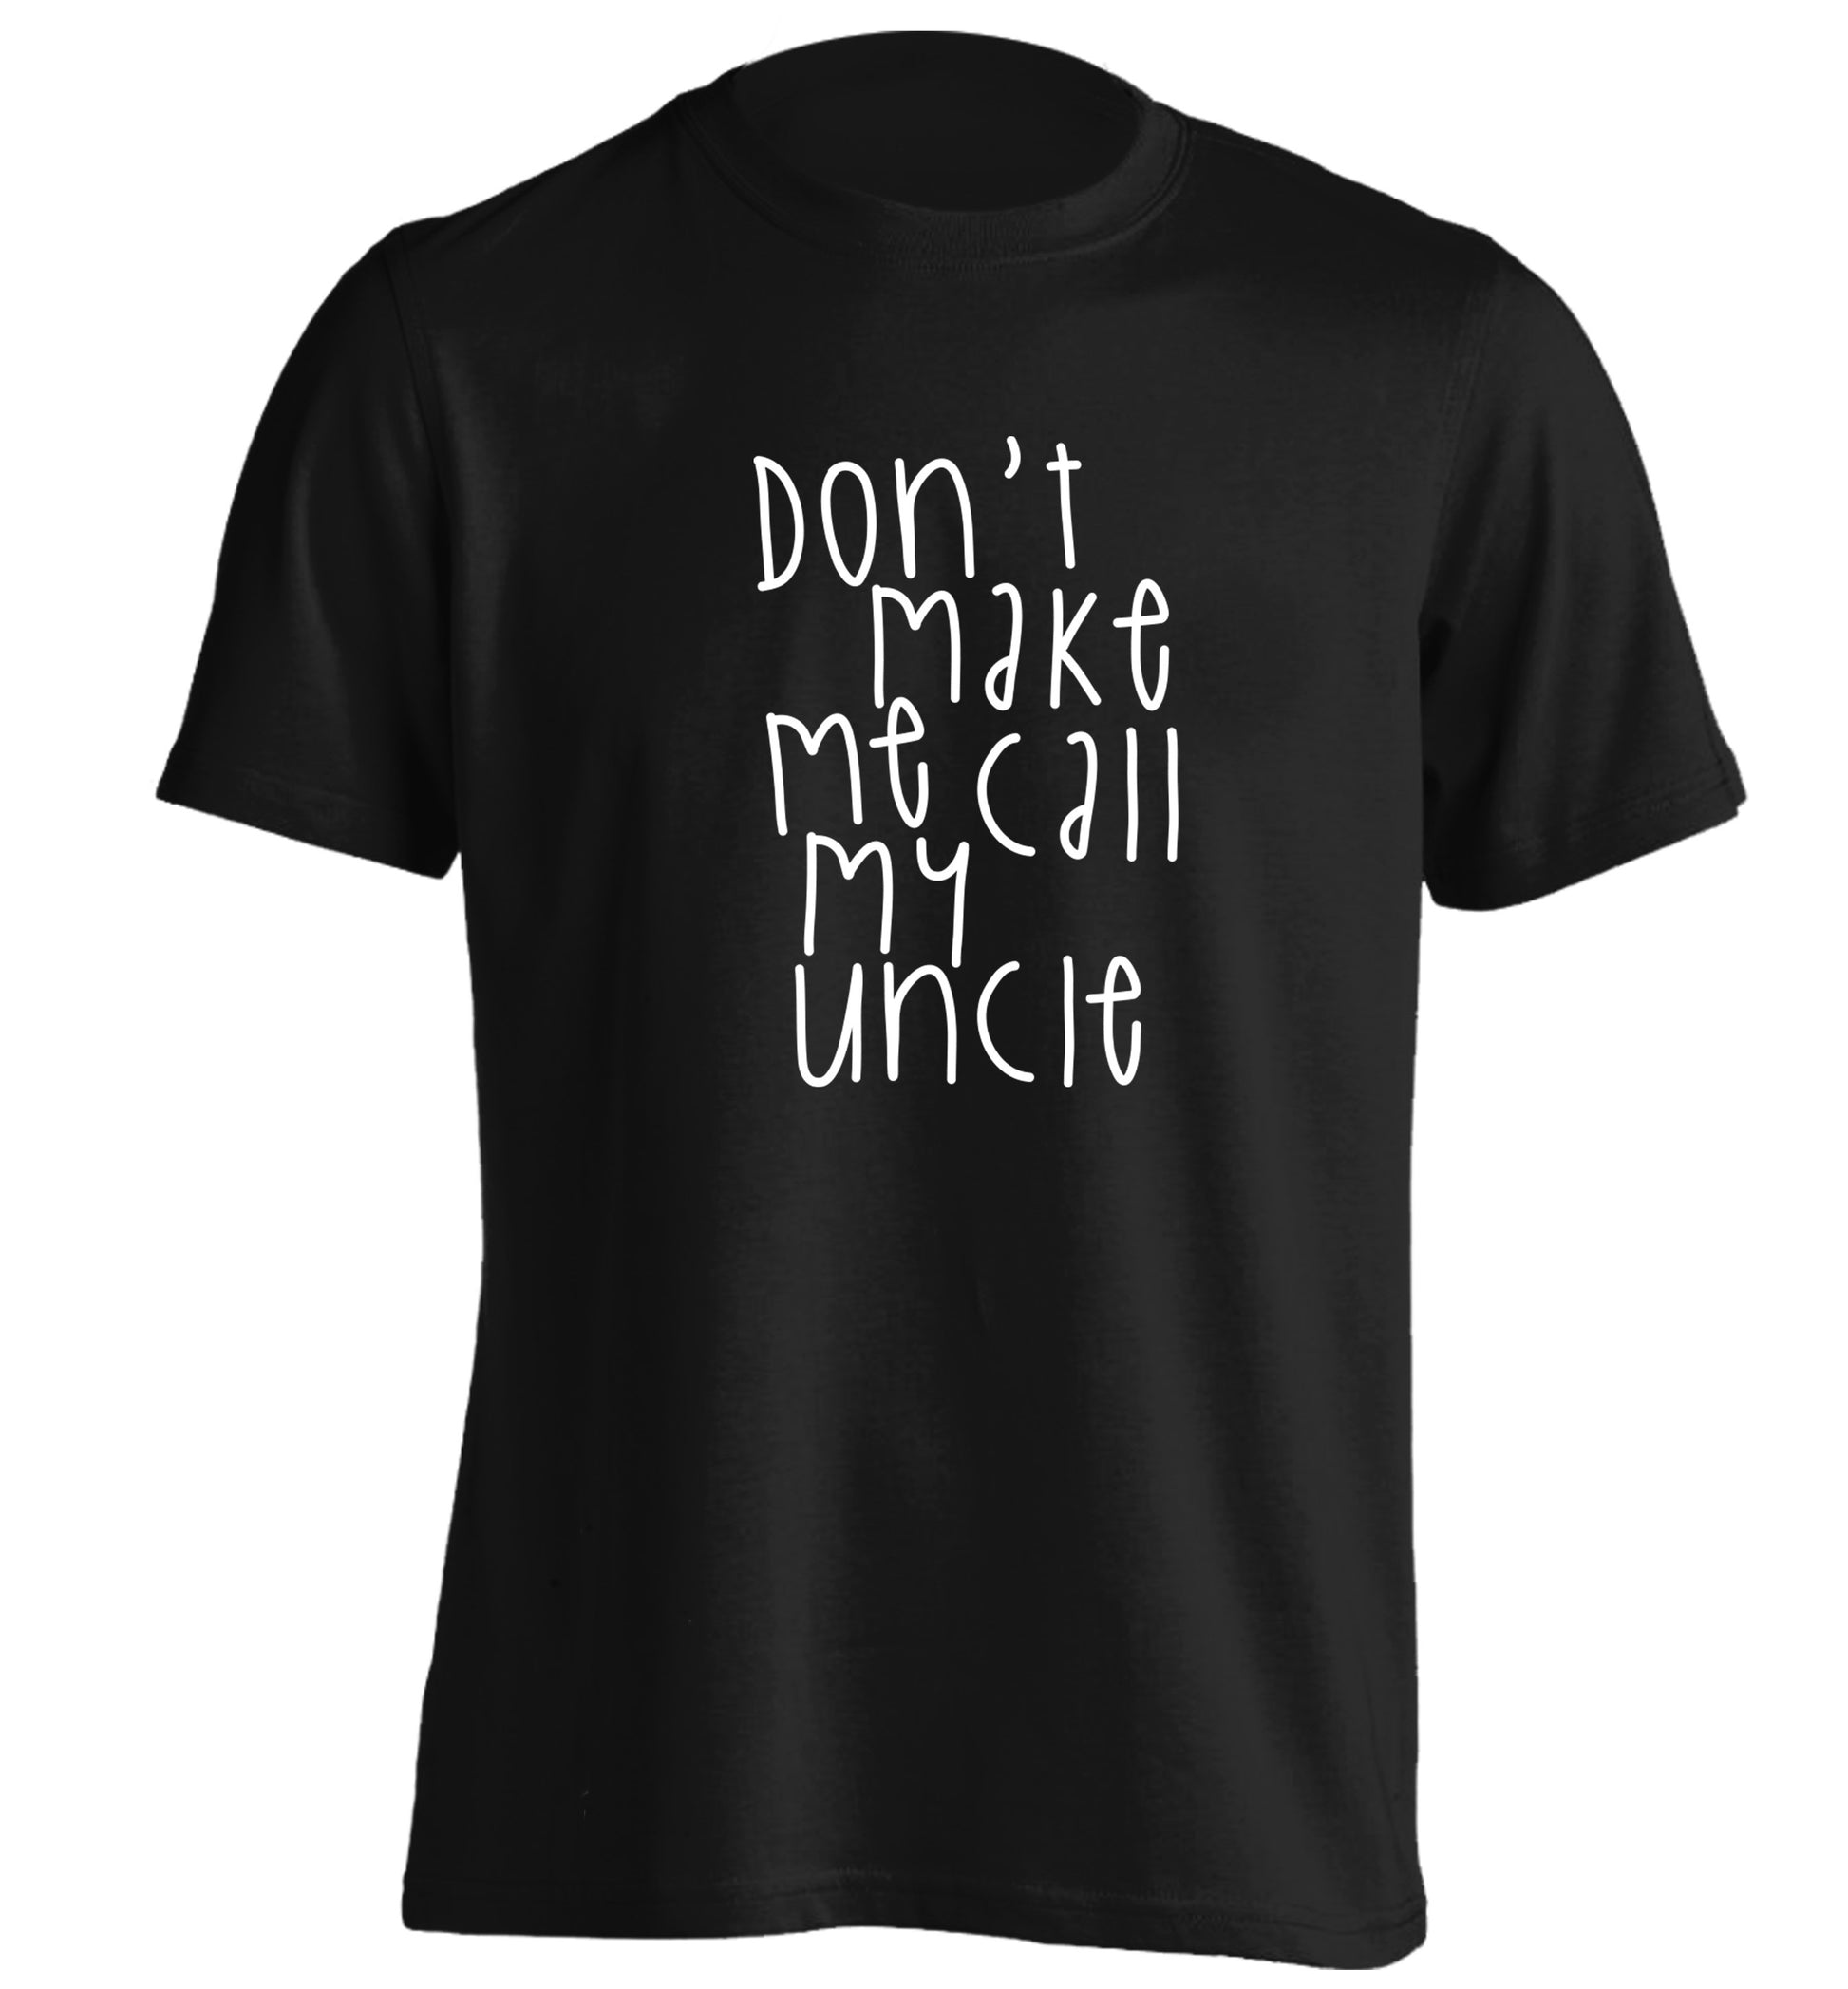 Don't make me call my uncle adults unisex black Tshirt 2XL